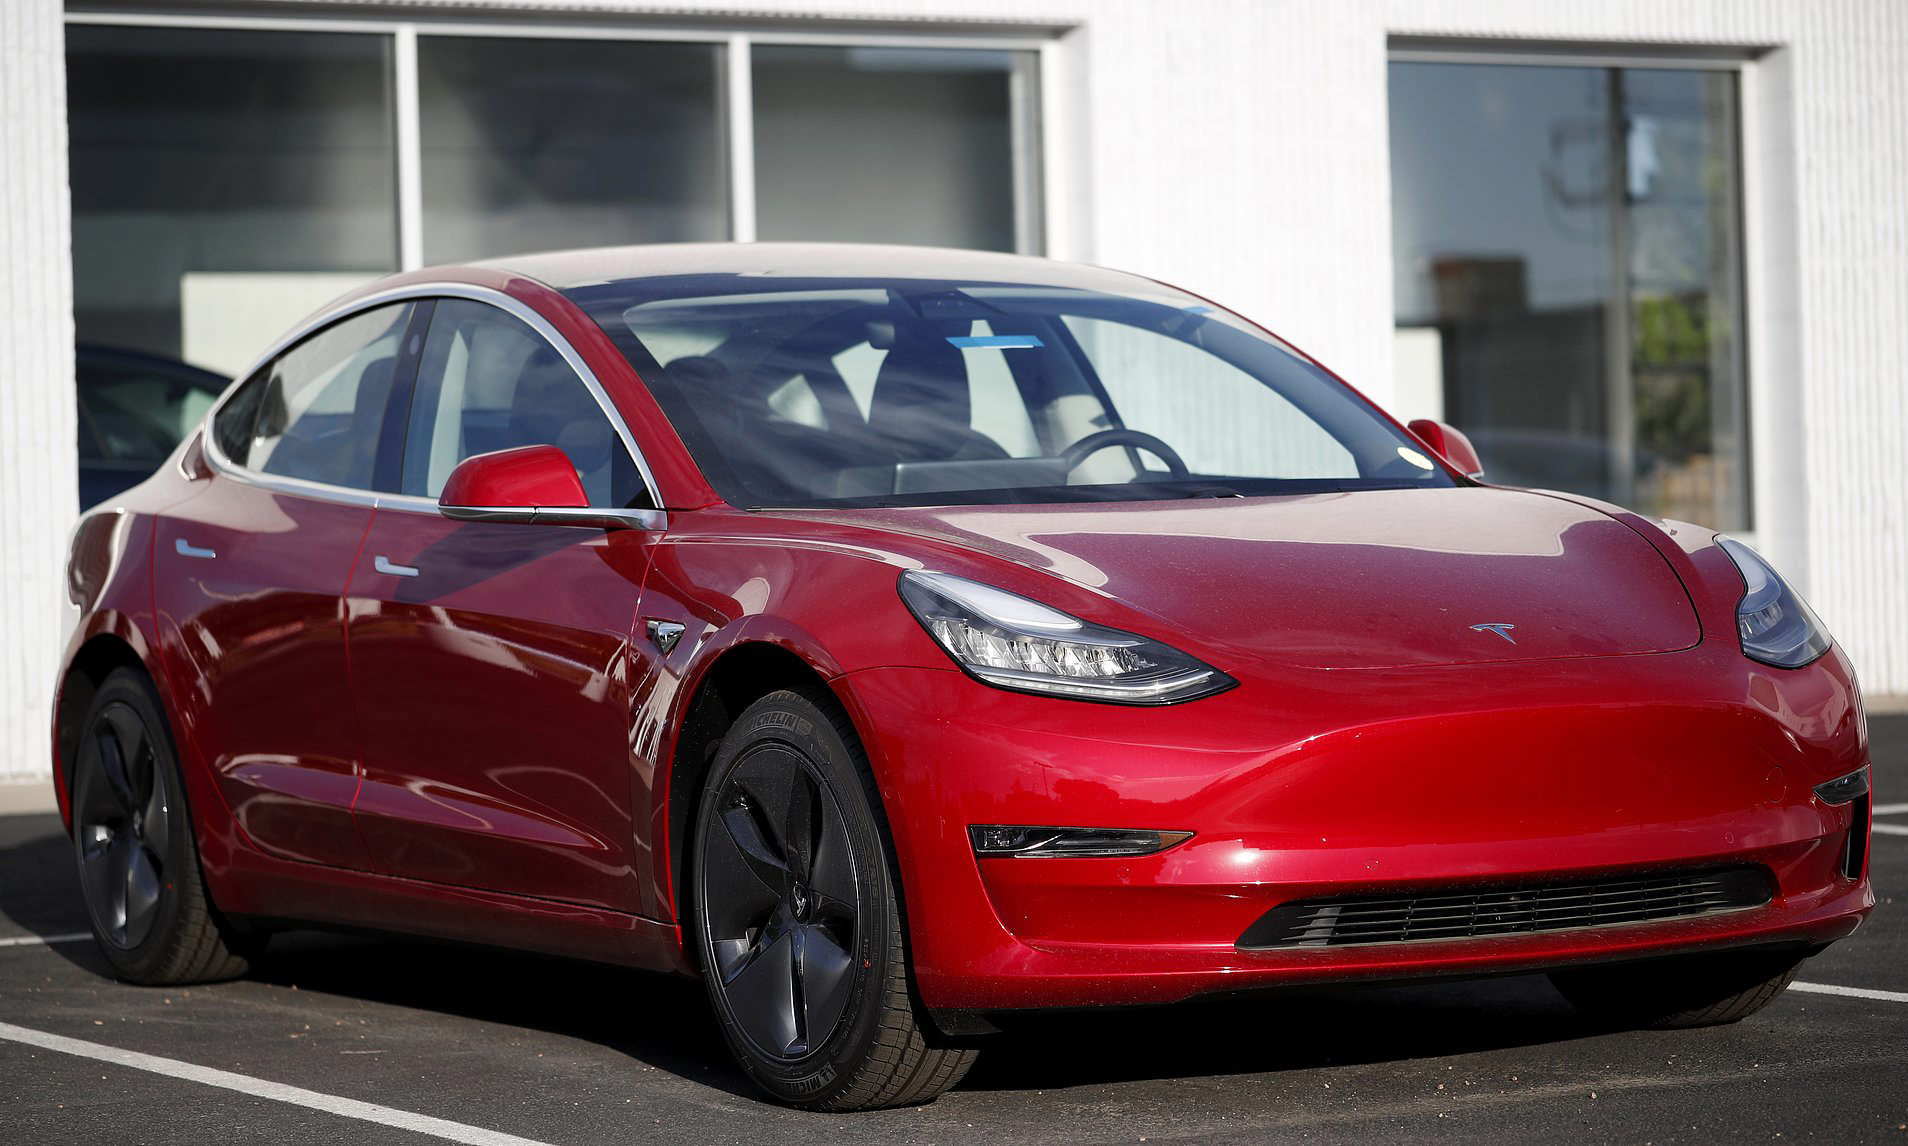 Tesla scraps its 'halfprice' 27,000 EV amid fierce competition from